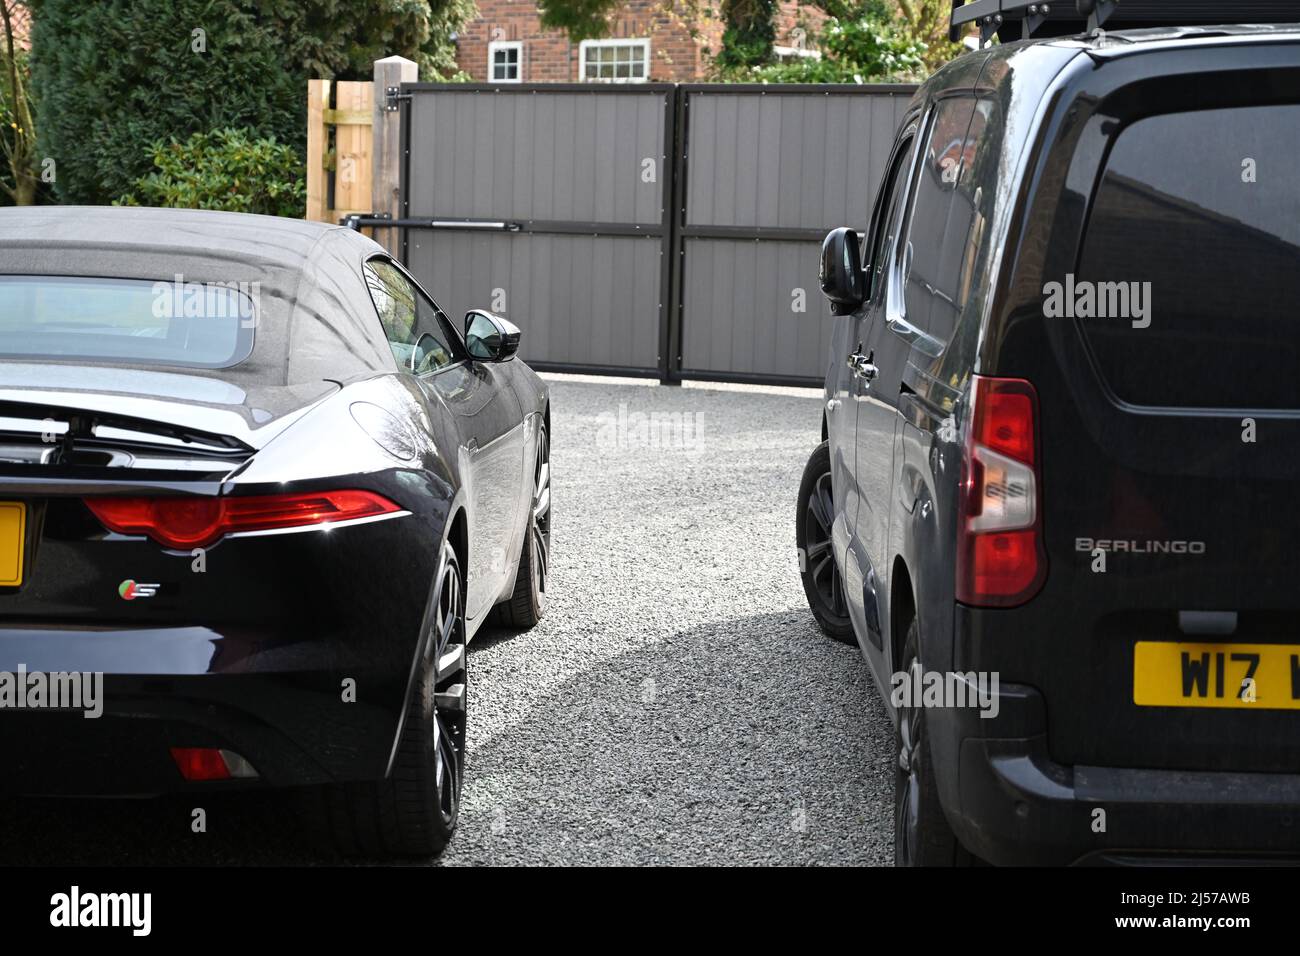 a view behind two parked black vehicles, a sports car and a van, on a grey stone driveway with grey and black entrance gates Stock Photo